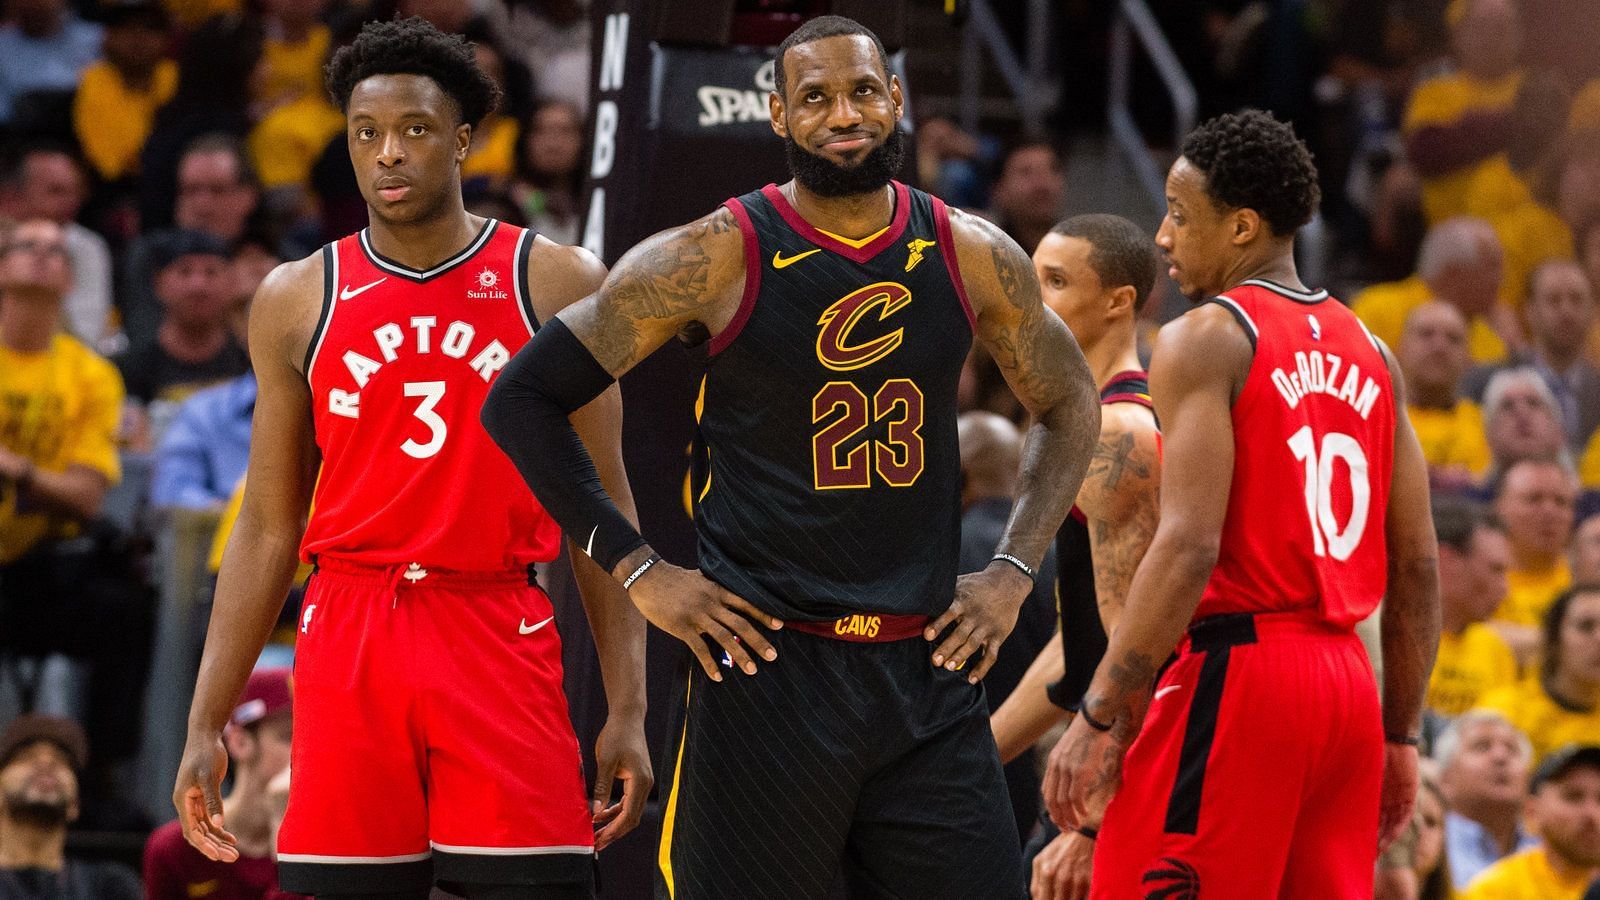 LeBron James with the Cleveland Cavaliers against the Toronto Raptors [Source: New York Times]